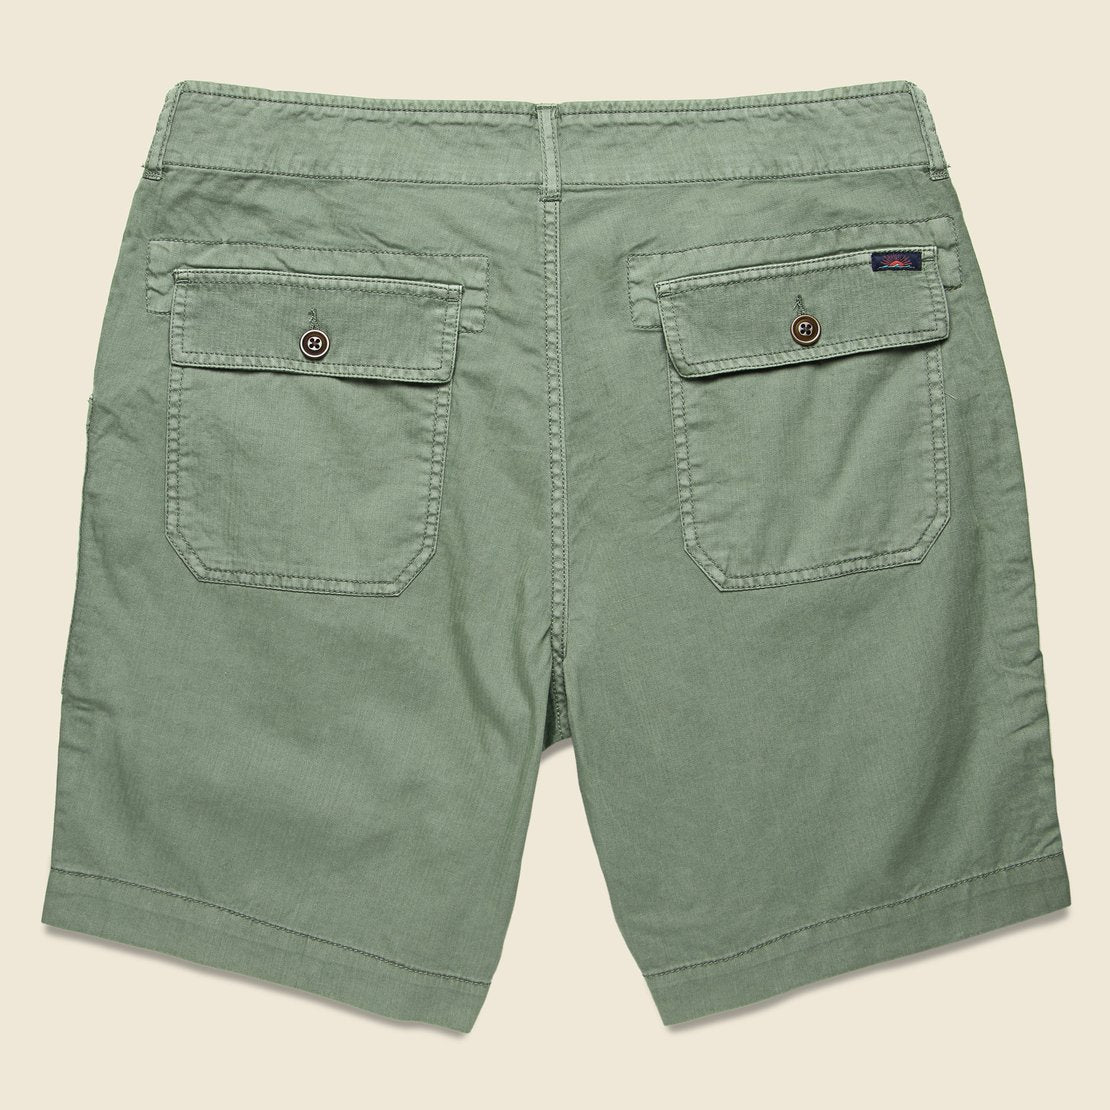 Camp Short - Olive - Faherty - STAG Provisions - Shorts - Solid